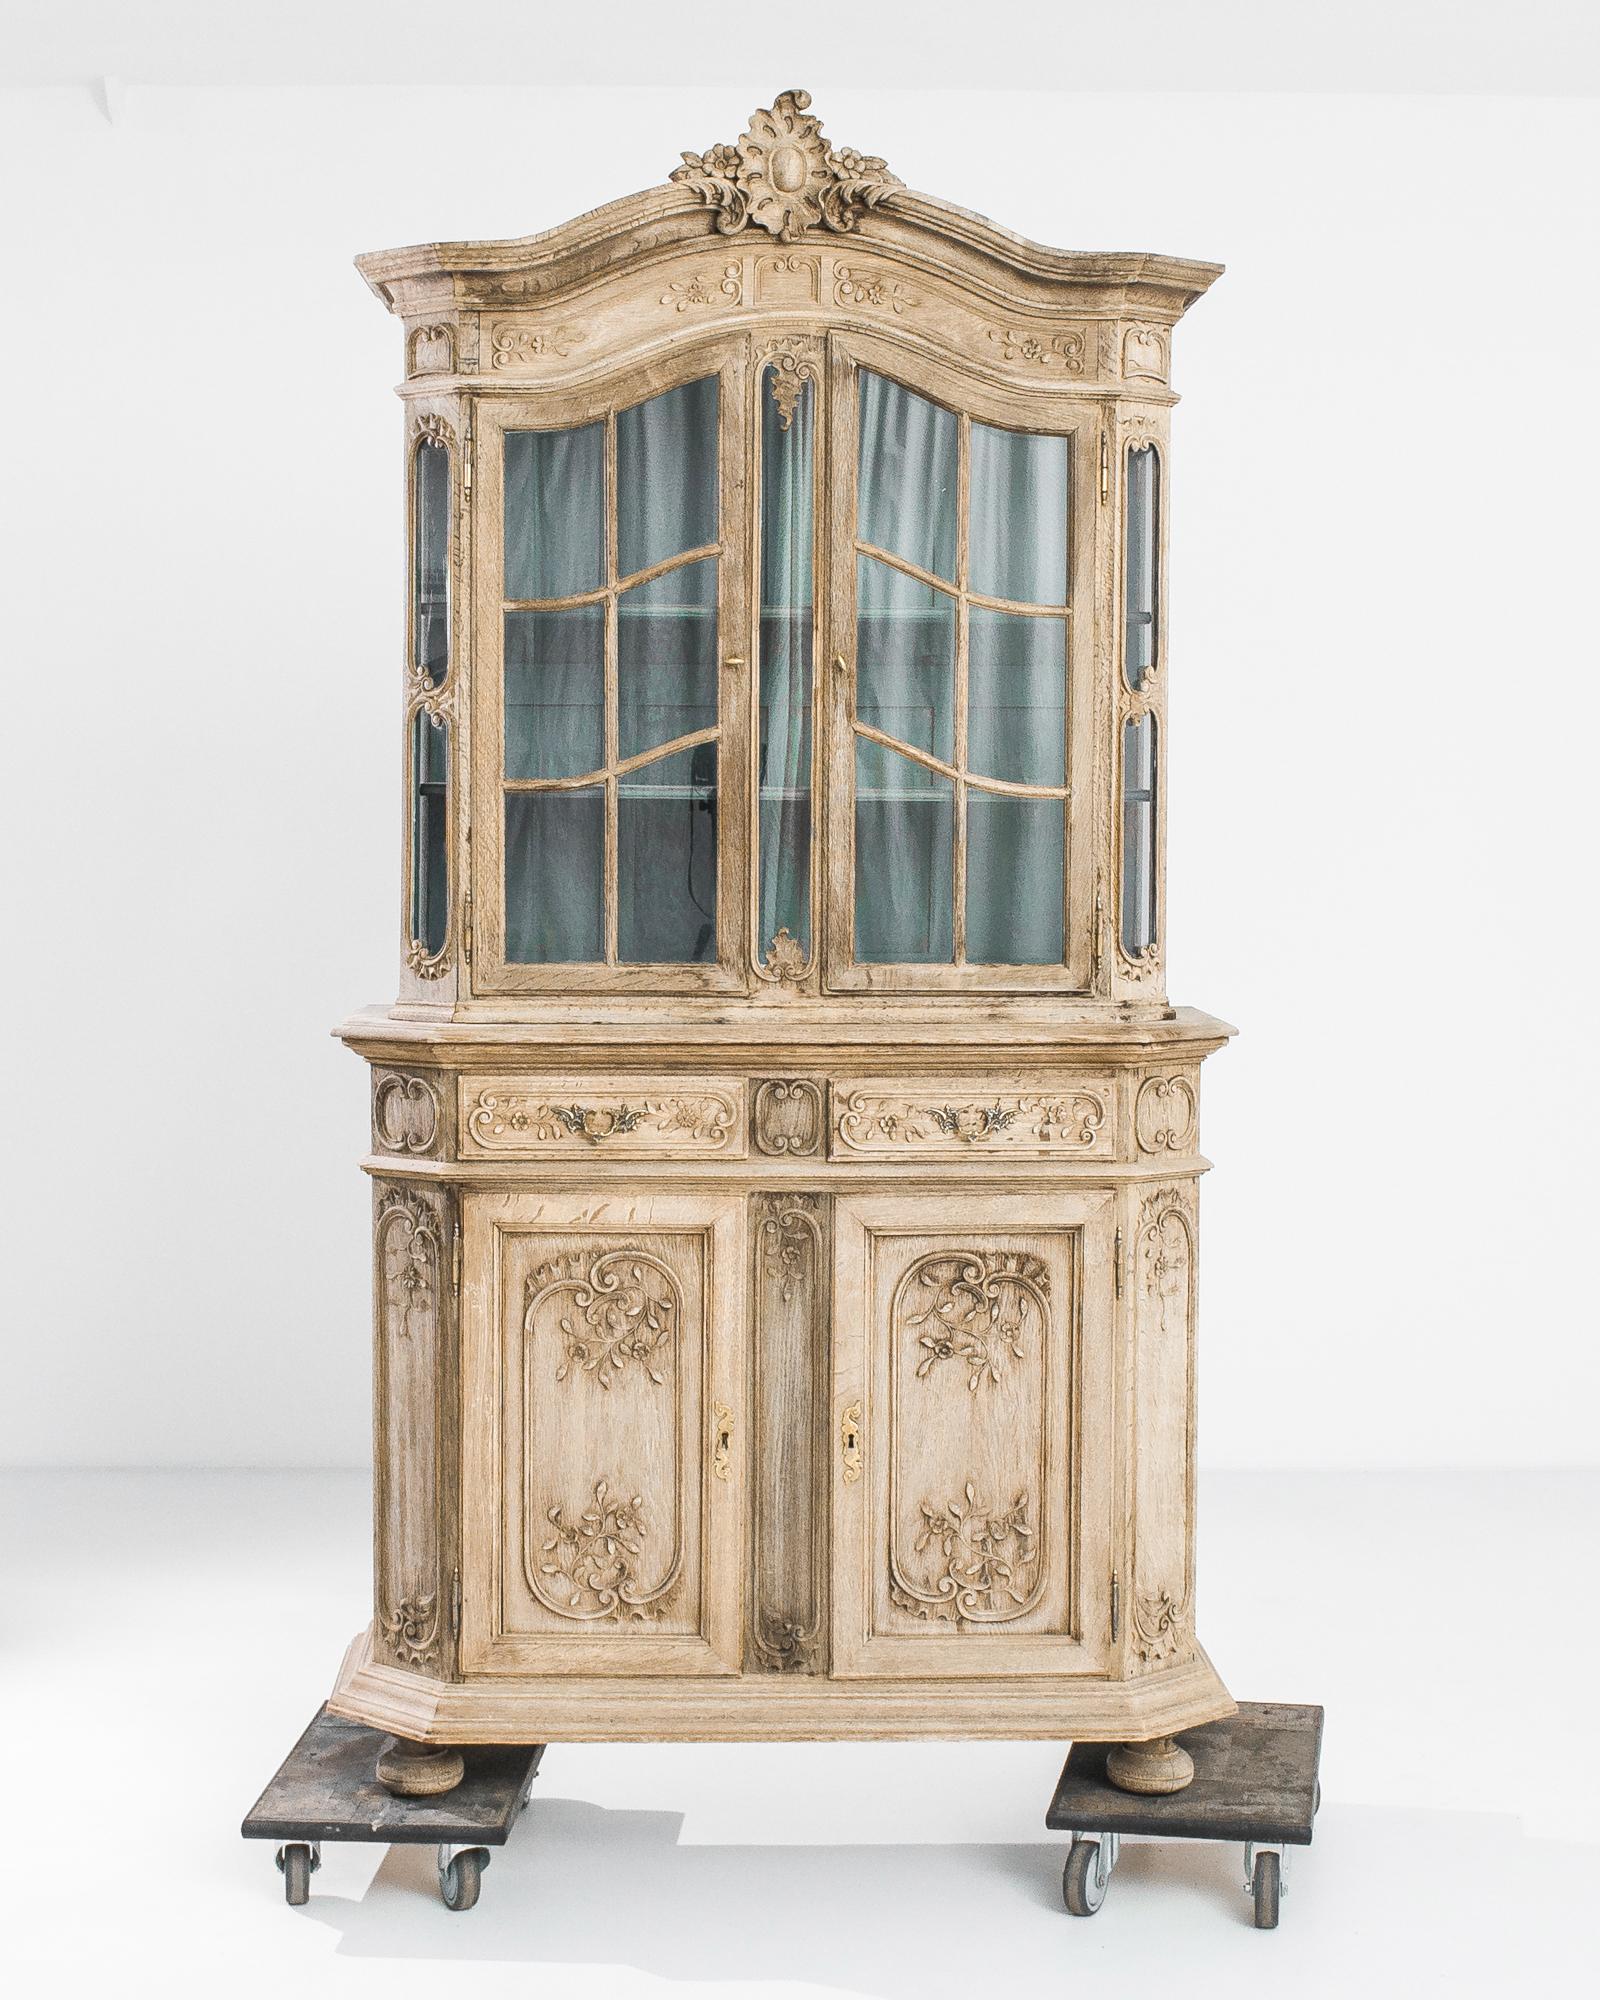 A bleached oak vitrine from Belgium, produced circa 1850. A stately display cabinet that stands like a sculpture in the round, featuring a three shelf upper cabinet, two central siding drawers, and a lower cabinet of two shelves. Filled with